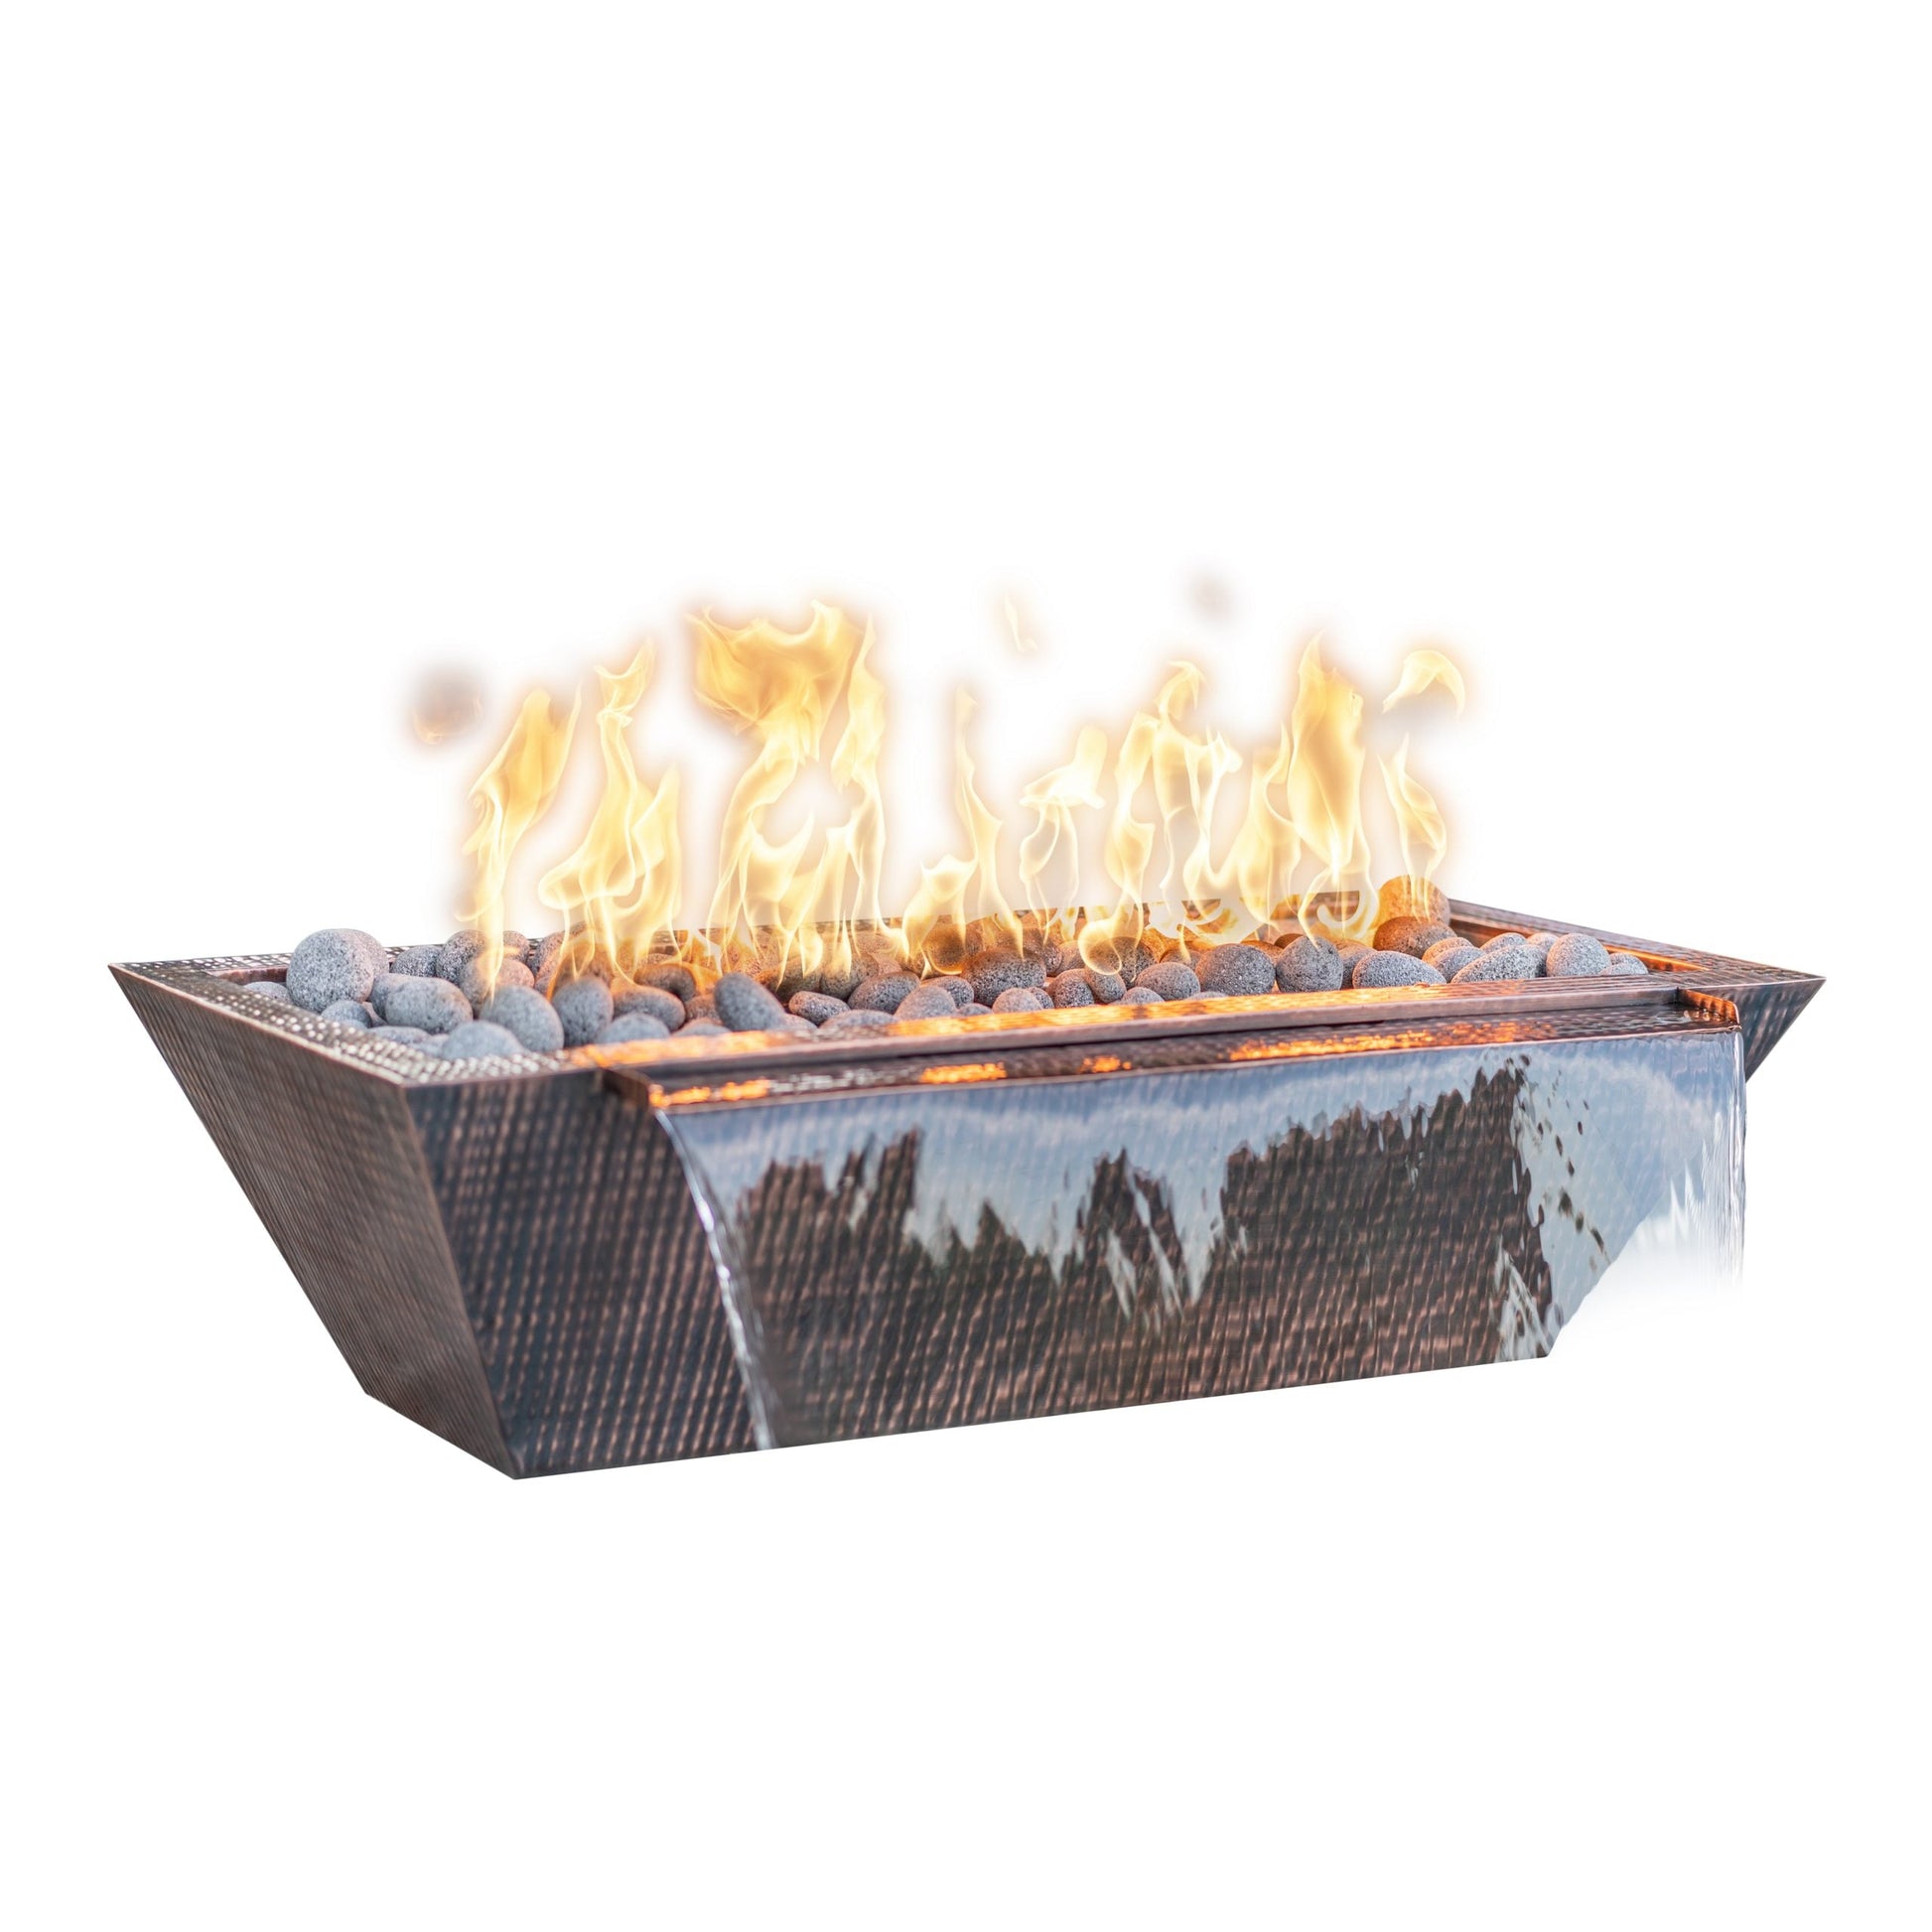 The Outdoor Plus Linear Maya 48" Stainless Steel Liquid Propane Fire & Water Bowl with Match Lit with Flame Sense Ignition